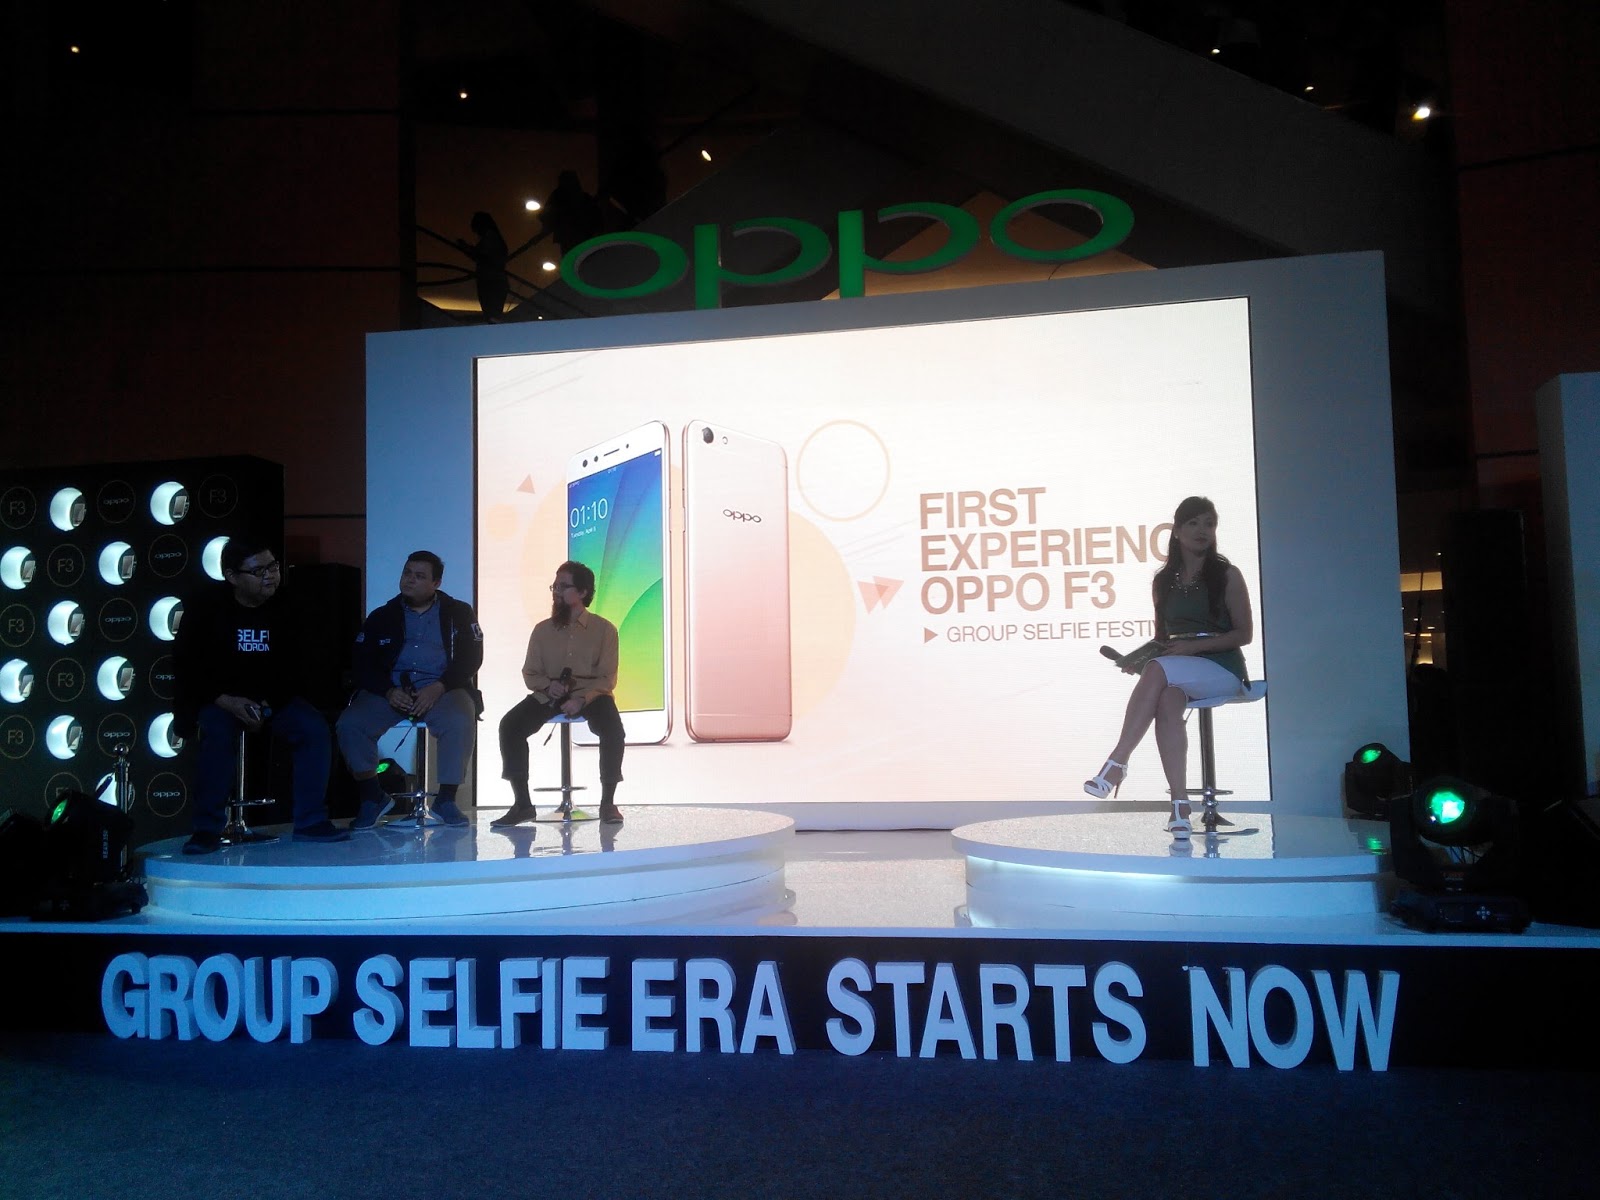 Advencious: First Experience OPPO F3, Vlogger Smartphone